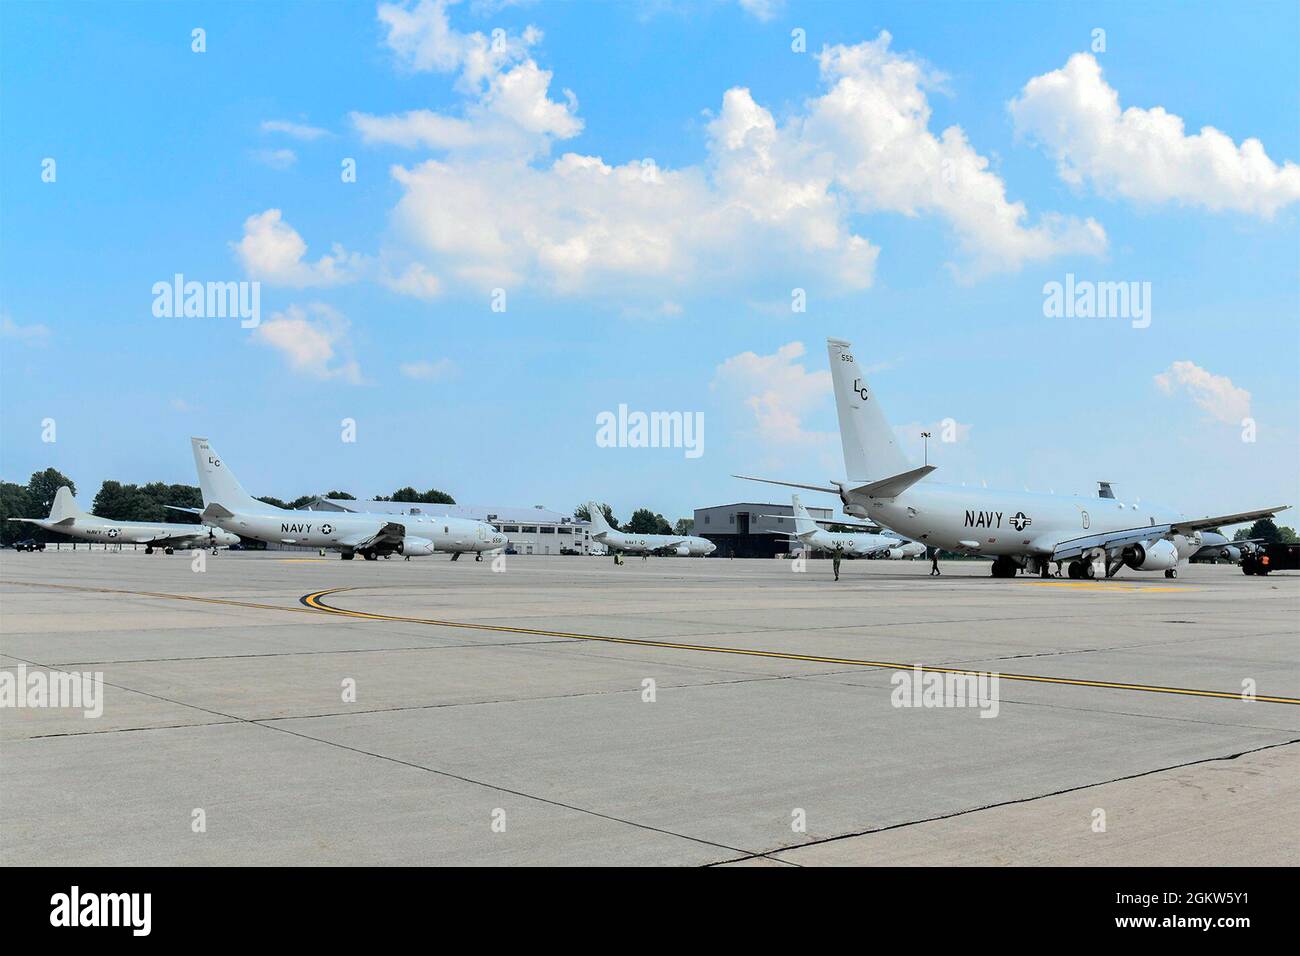 Four P-8 Poseidon maritime patrol aircraft and one P-3 Orion along with support personnel from Naval Air Station Jacksonville, Florida evacuated to Selfridge ANG Base, Mich., July. 6, 2021.  The Navy aircraft are at Selfridge to take shelter from Hurricane Elsa, which is due to make landfall today.  The base's extensive ramp space make Selfridge a perferct location for hurricane evacuation support as well as a wide variety of transient aircraft. Stock Photo